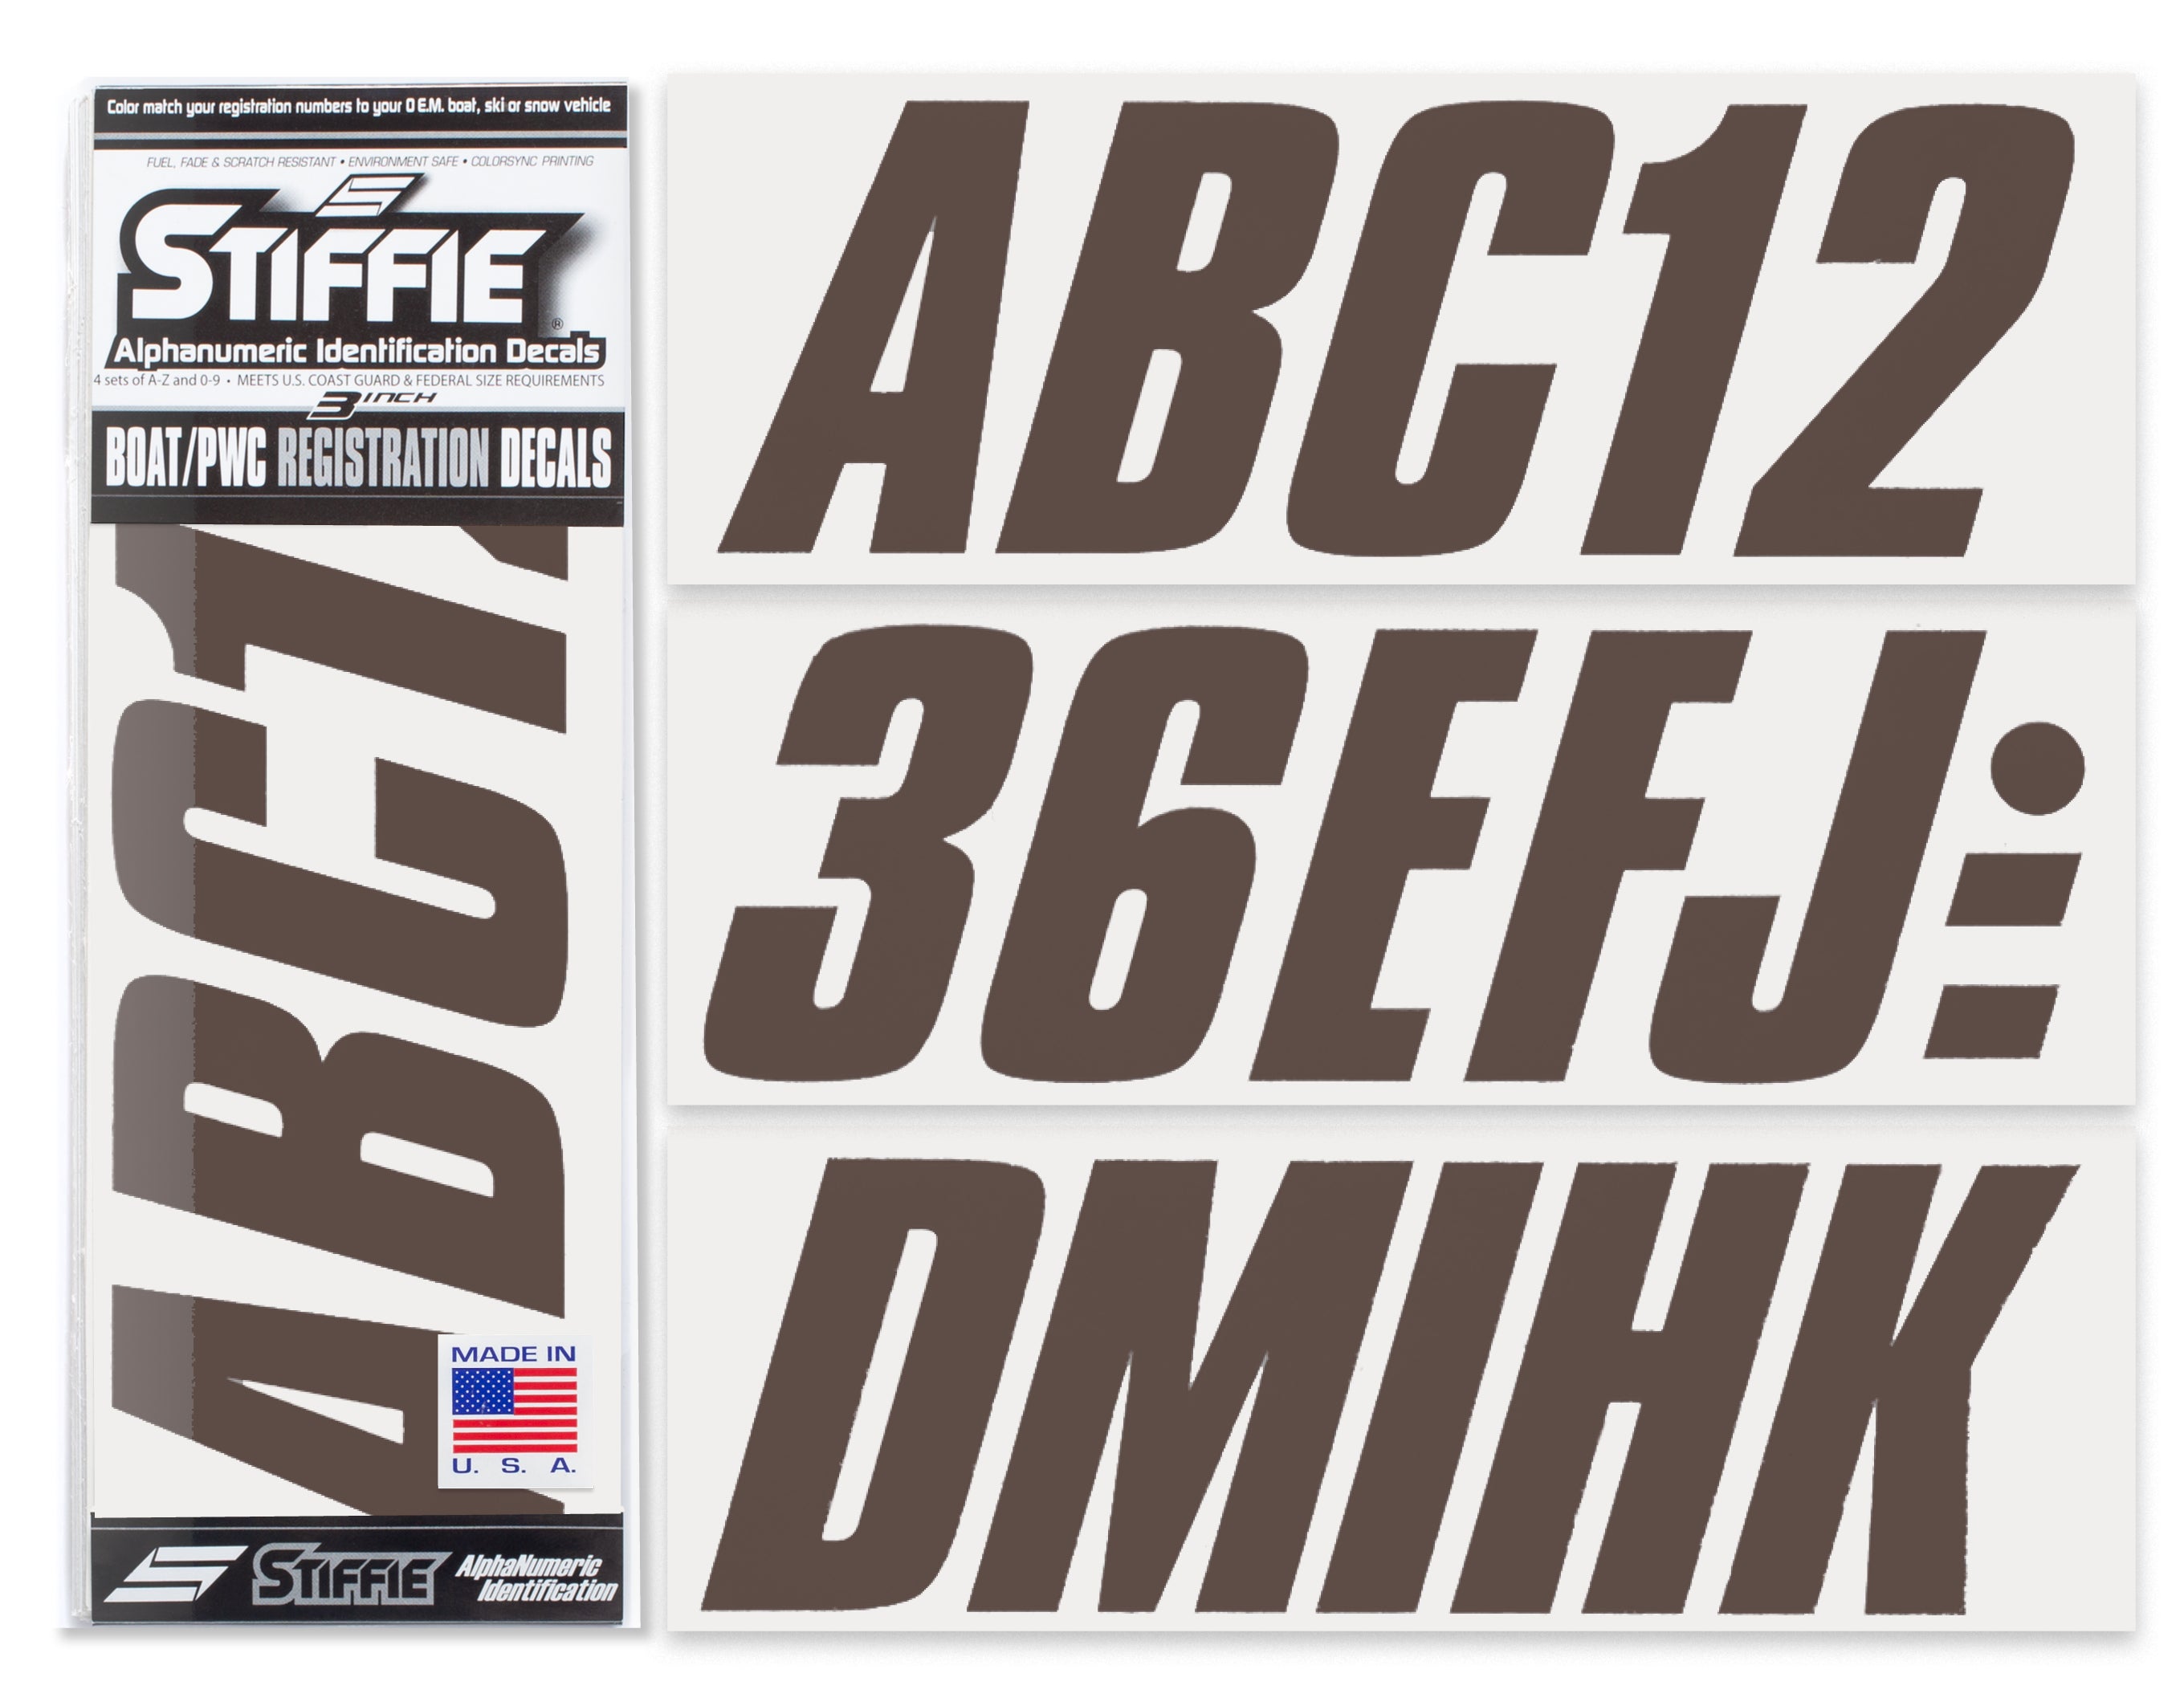 STIFFIE Shift Brown 3" ID Kit Alpha-Numeric Registration Identification Numbers Stickers Decals for Boats & Personal Watercraft